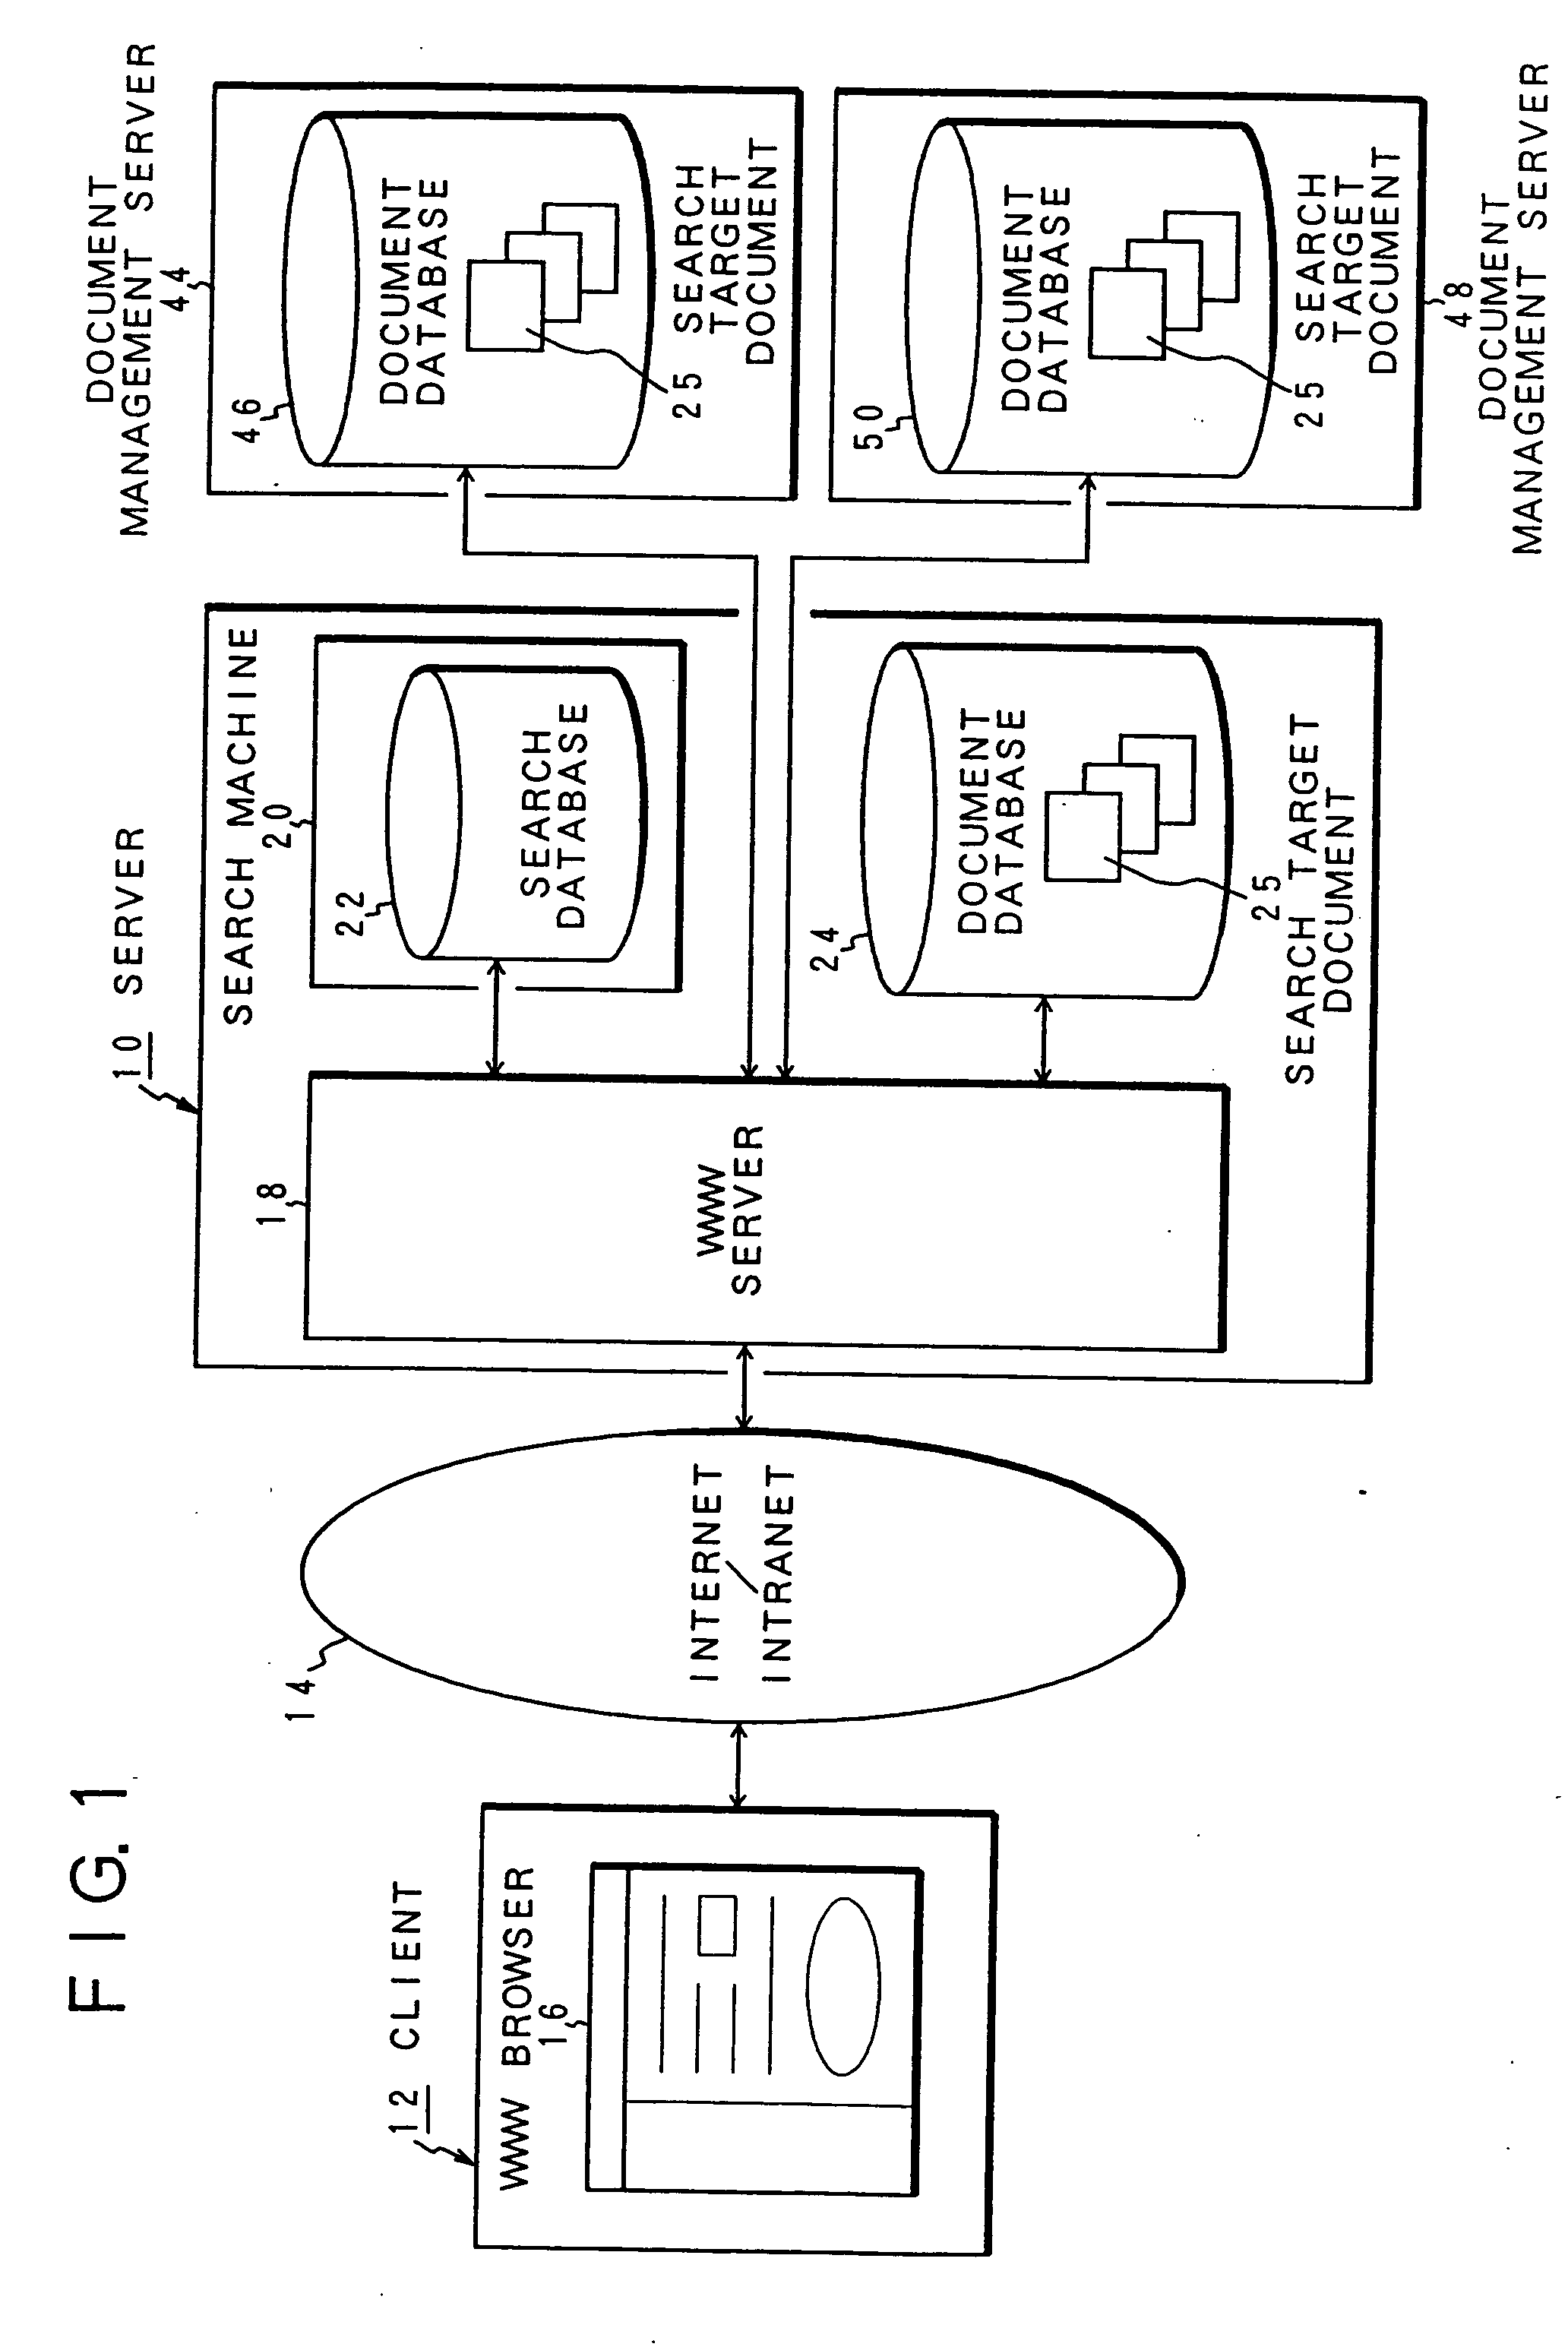 Document information search apparatus and method and recording medium storing document information search program therein